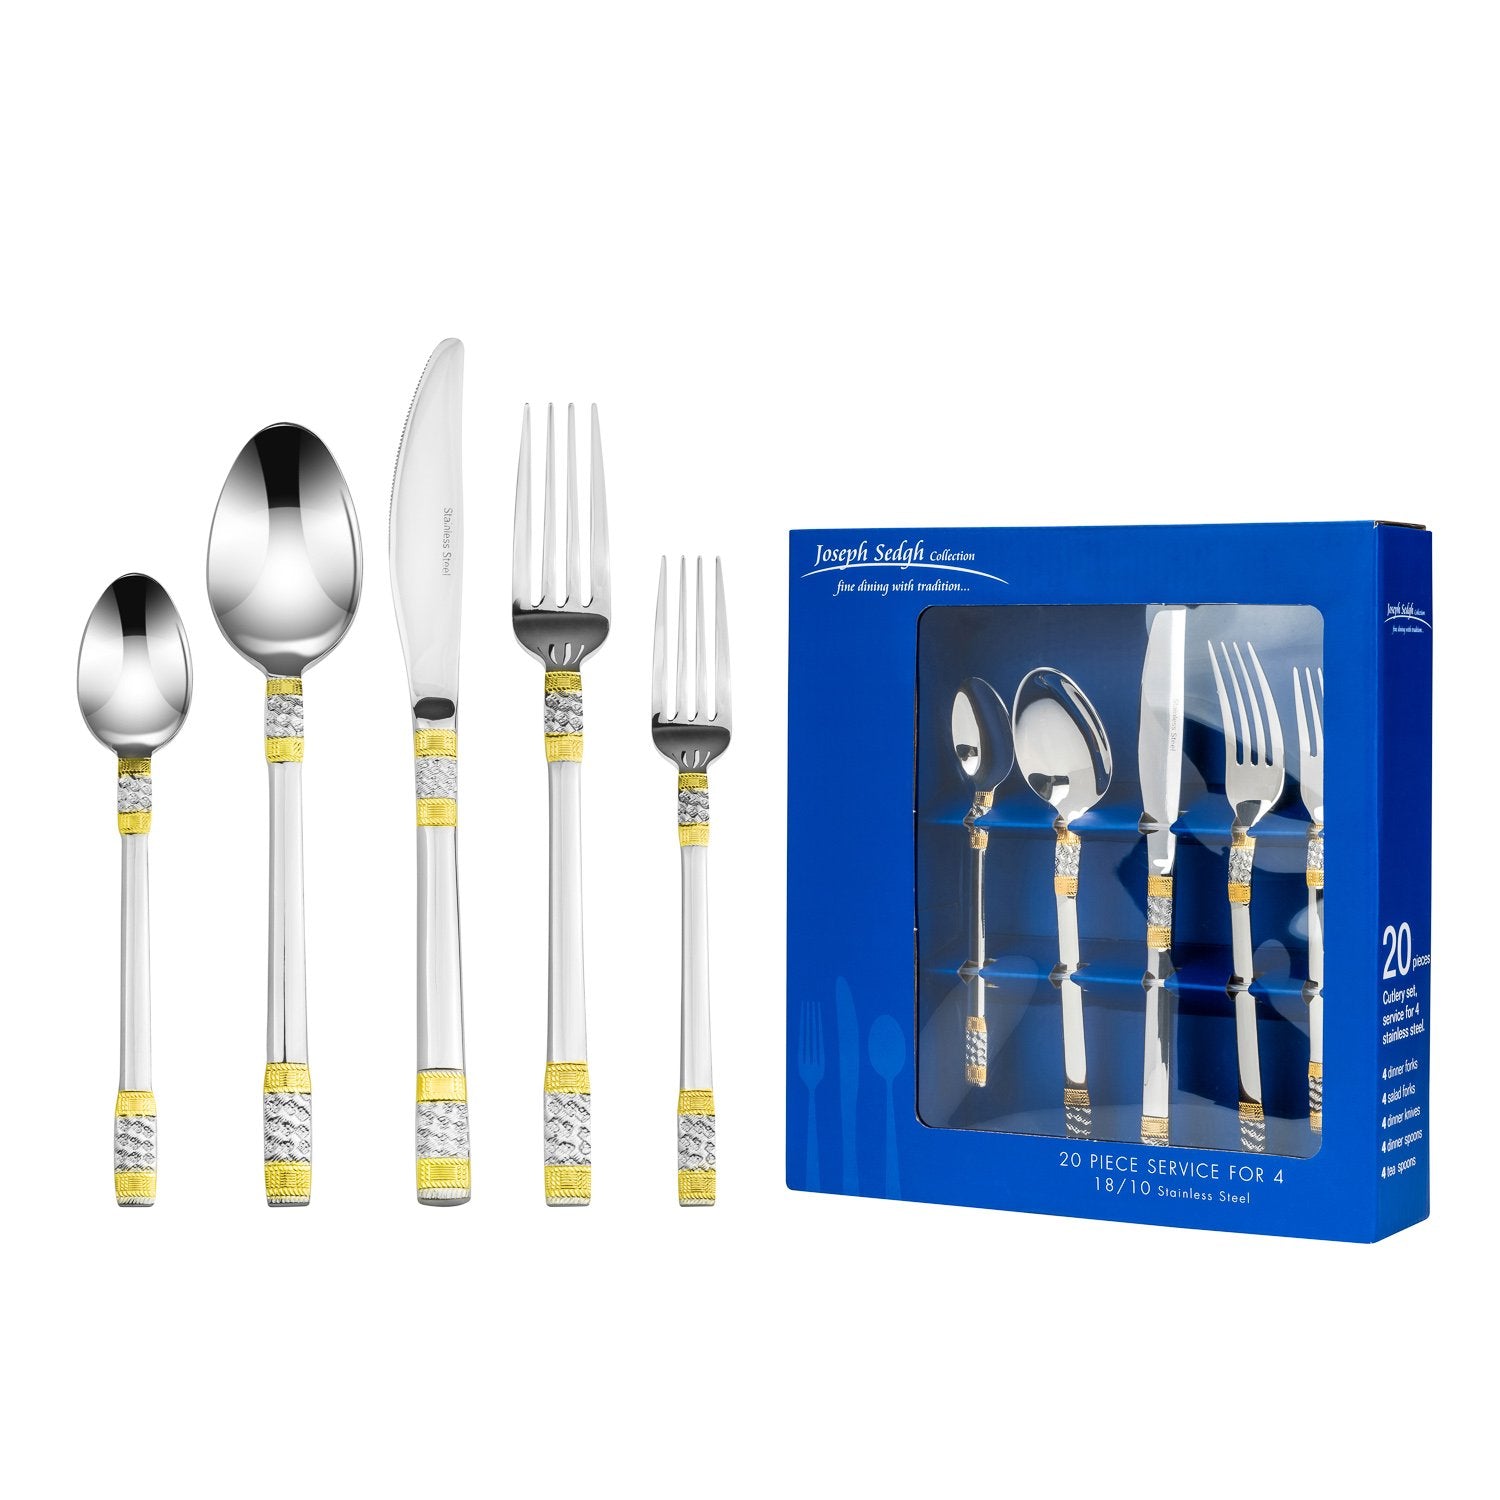 Joseph Sedgh 582G-20 18/10 Flatware, Service for 4, Silver with Gold